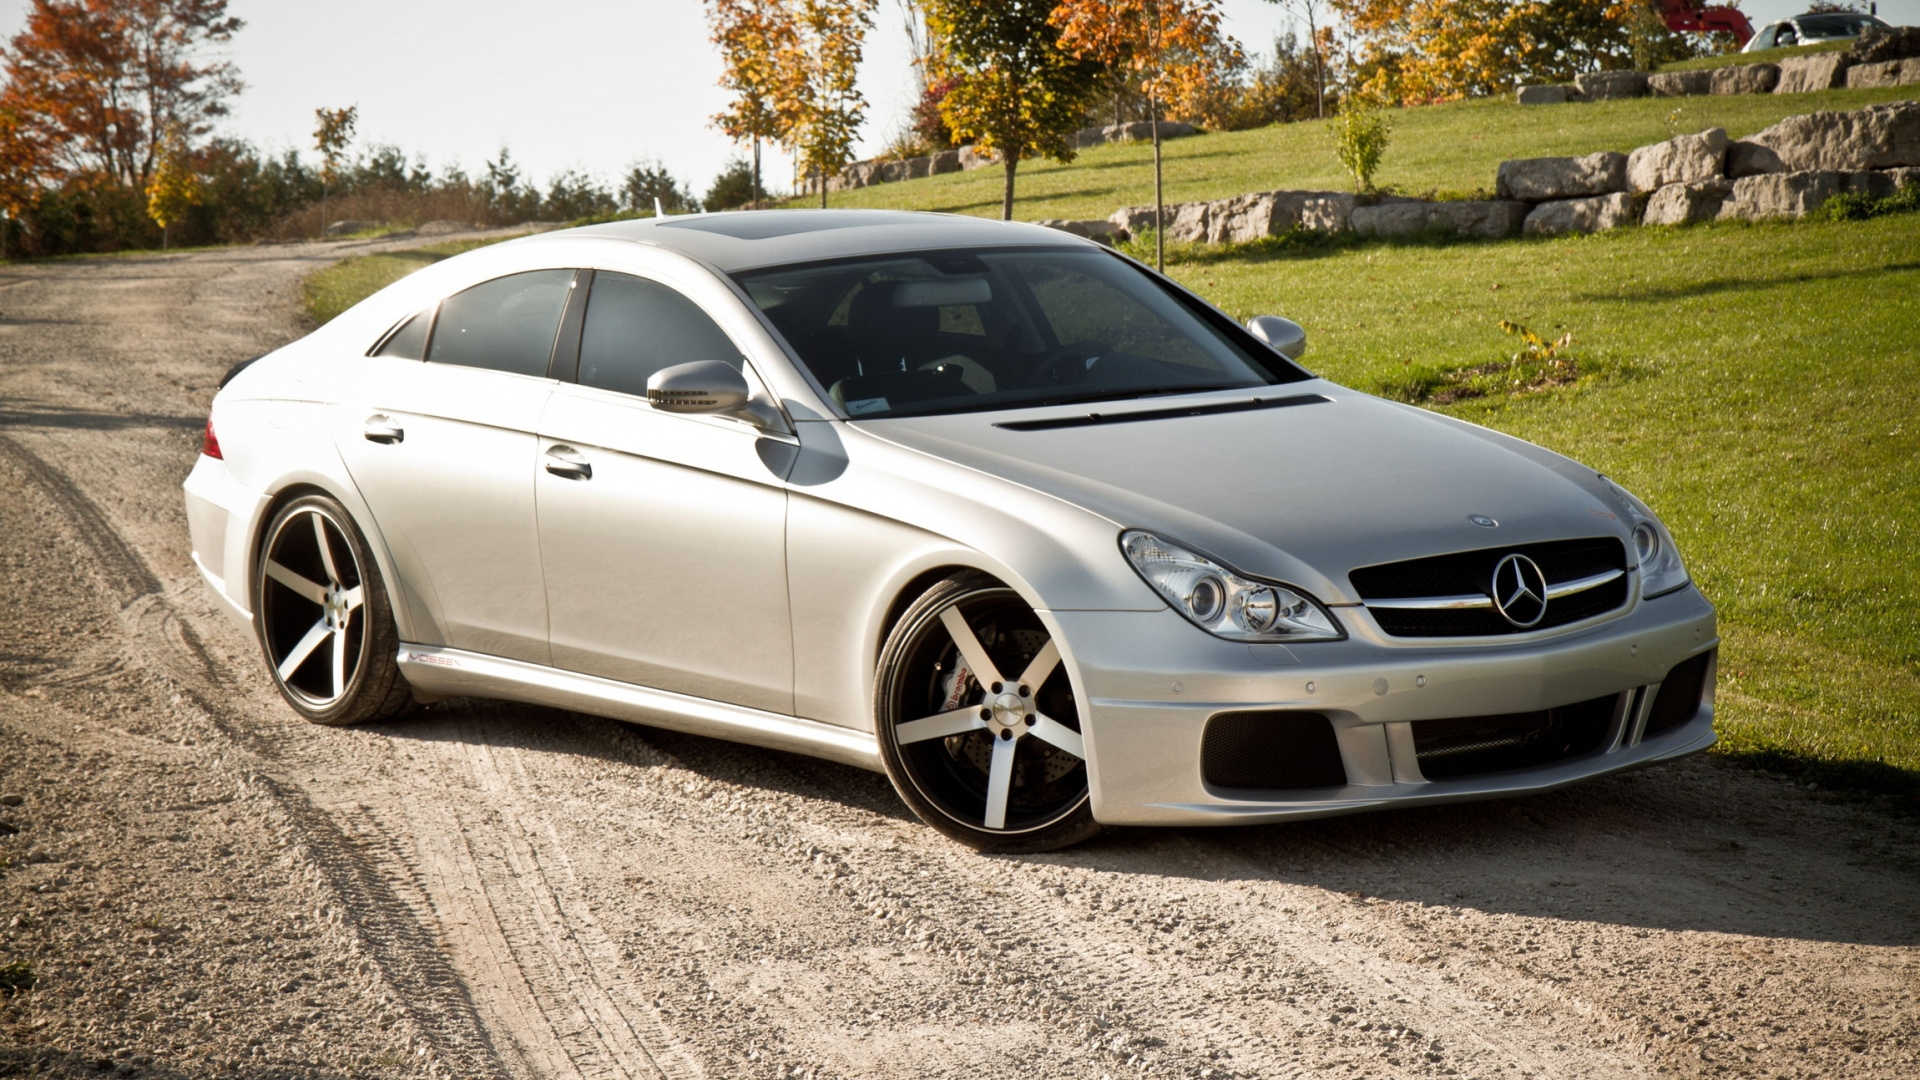 Silver Mercedes Benz Coupe on Road During Daytime. Wallpaper in 1920x1080 Resolution